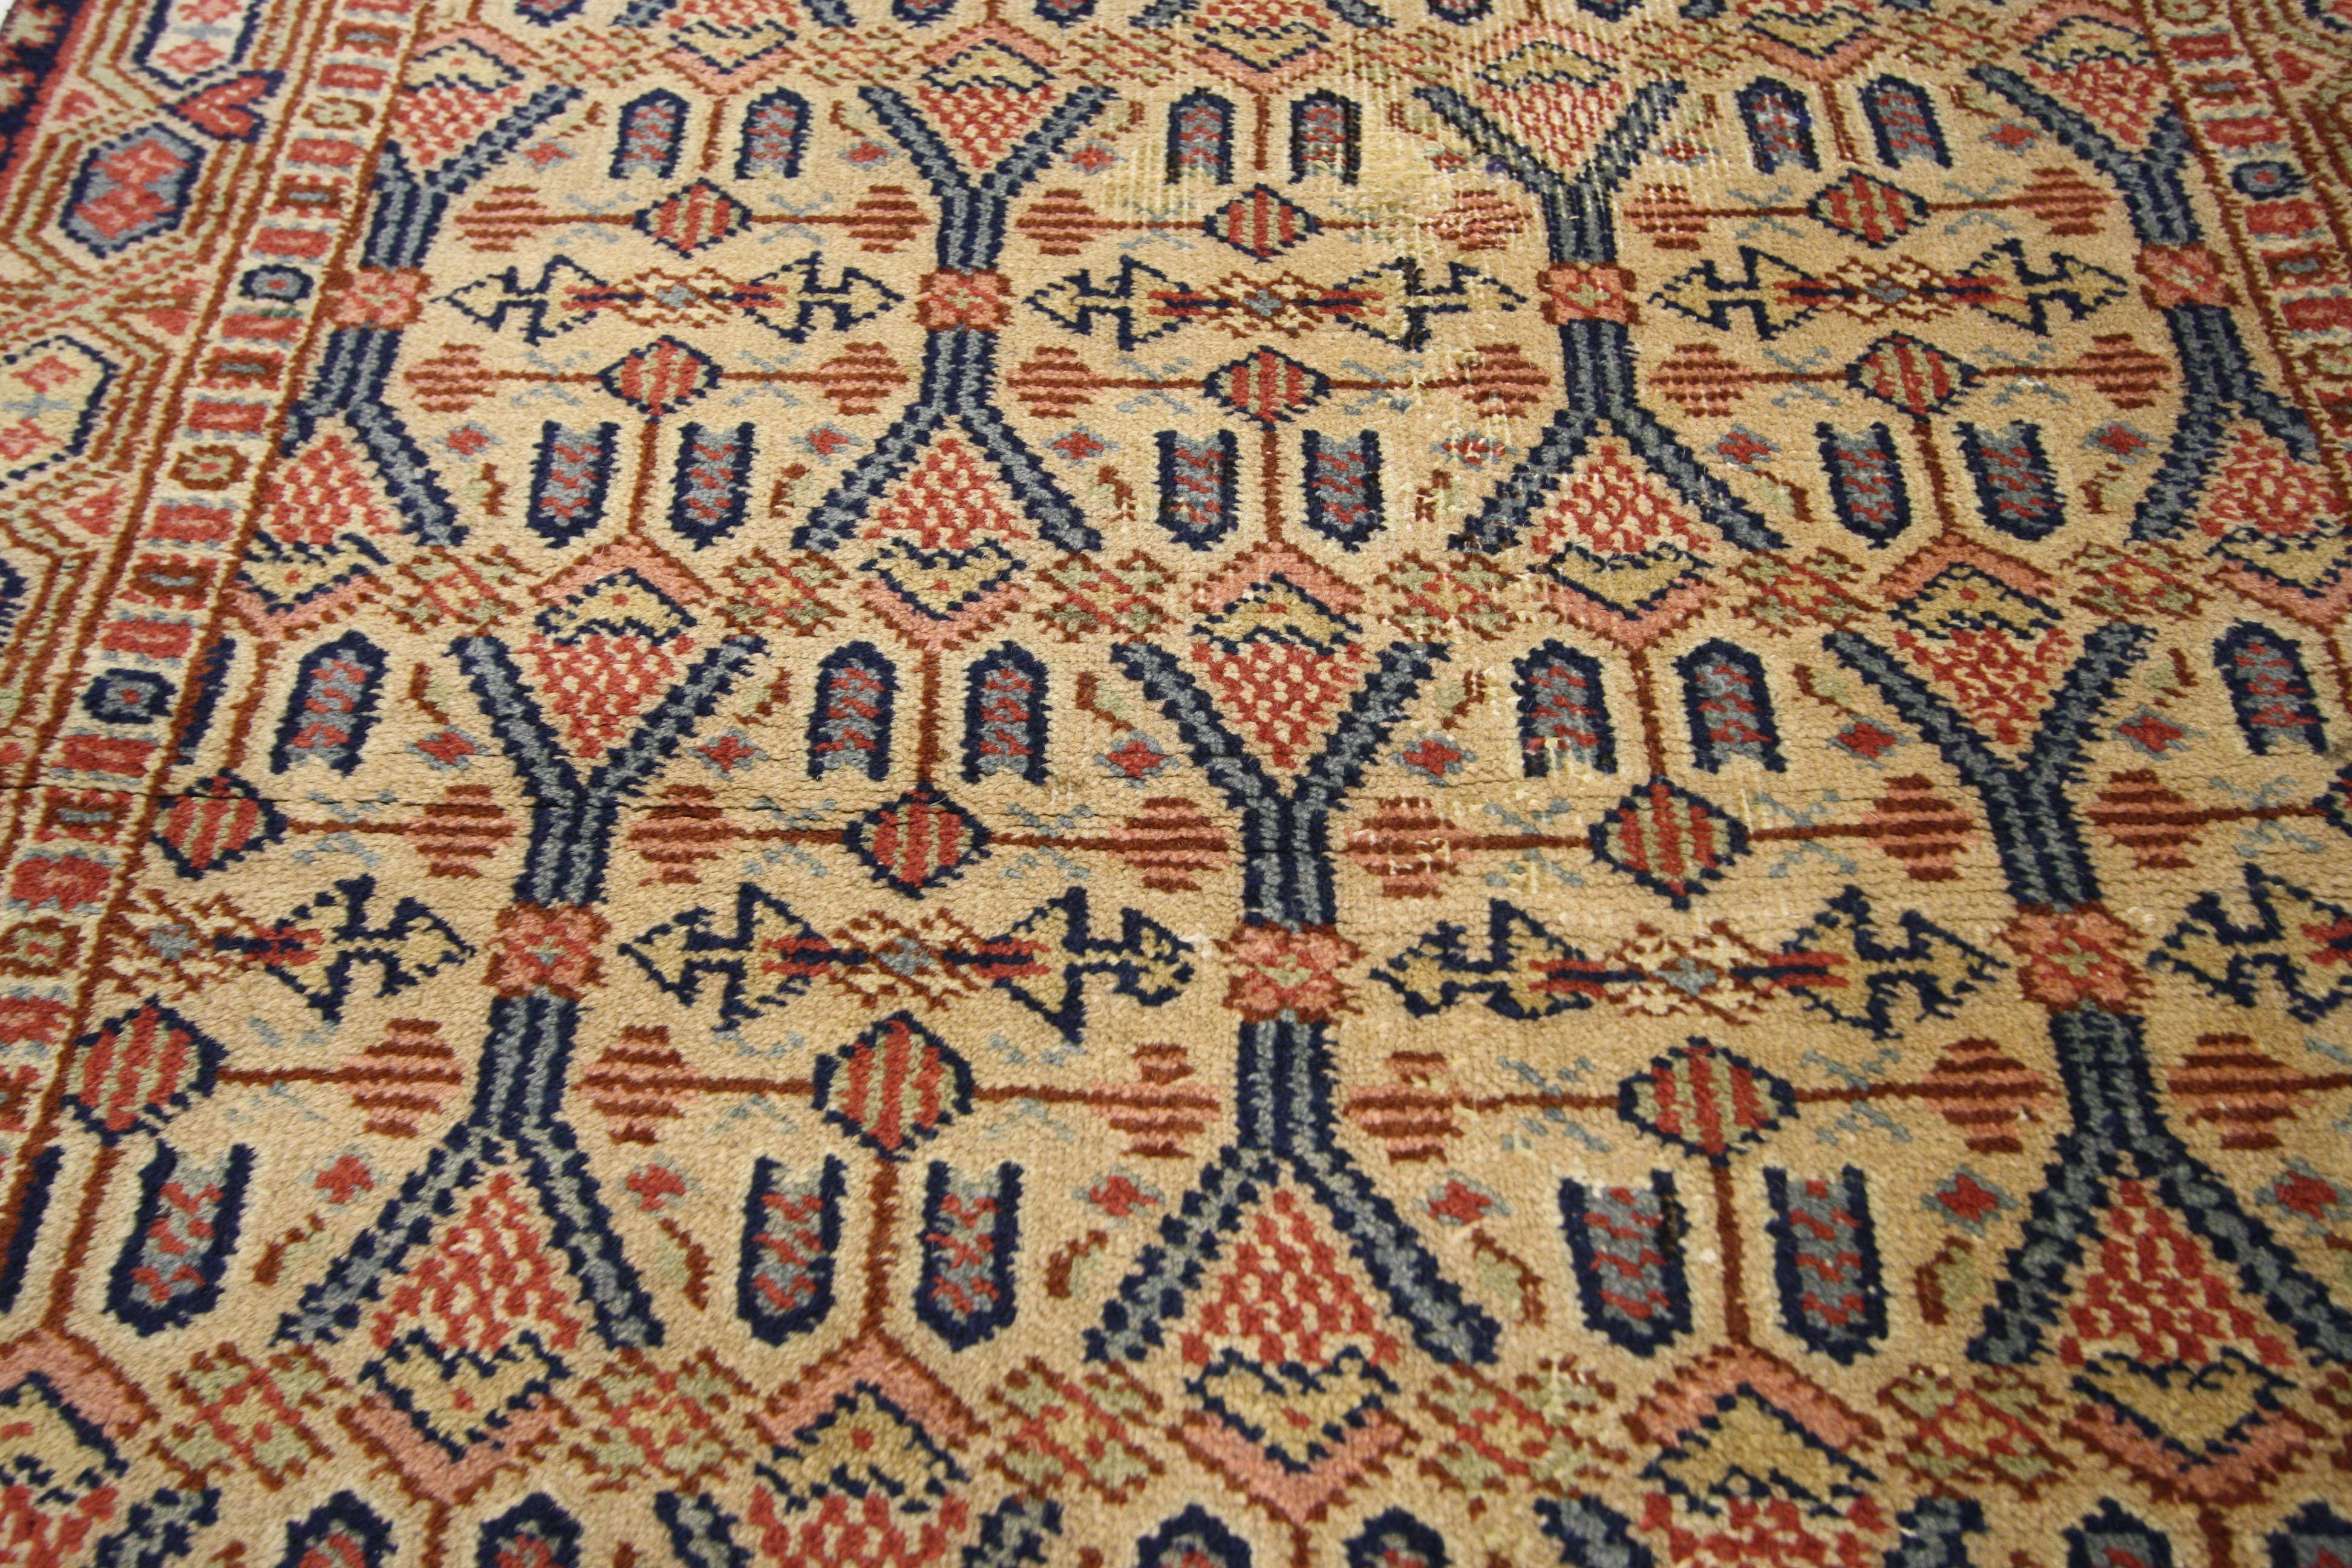 Vintage Turkish Oushak Hallway Runner with Rustic Art Deco Style In Good Condition For Sale In Dallas, TX